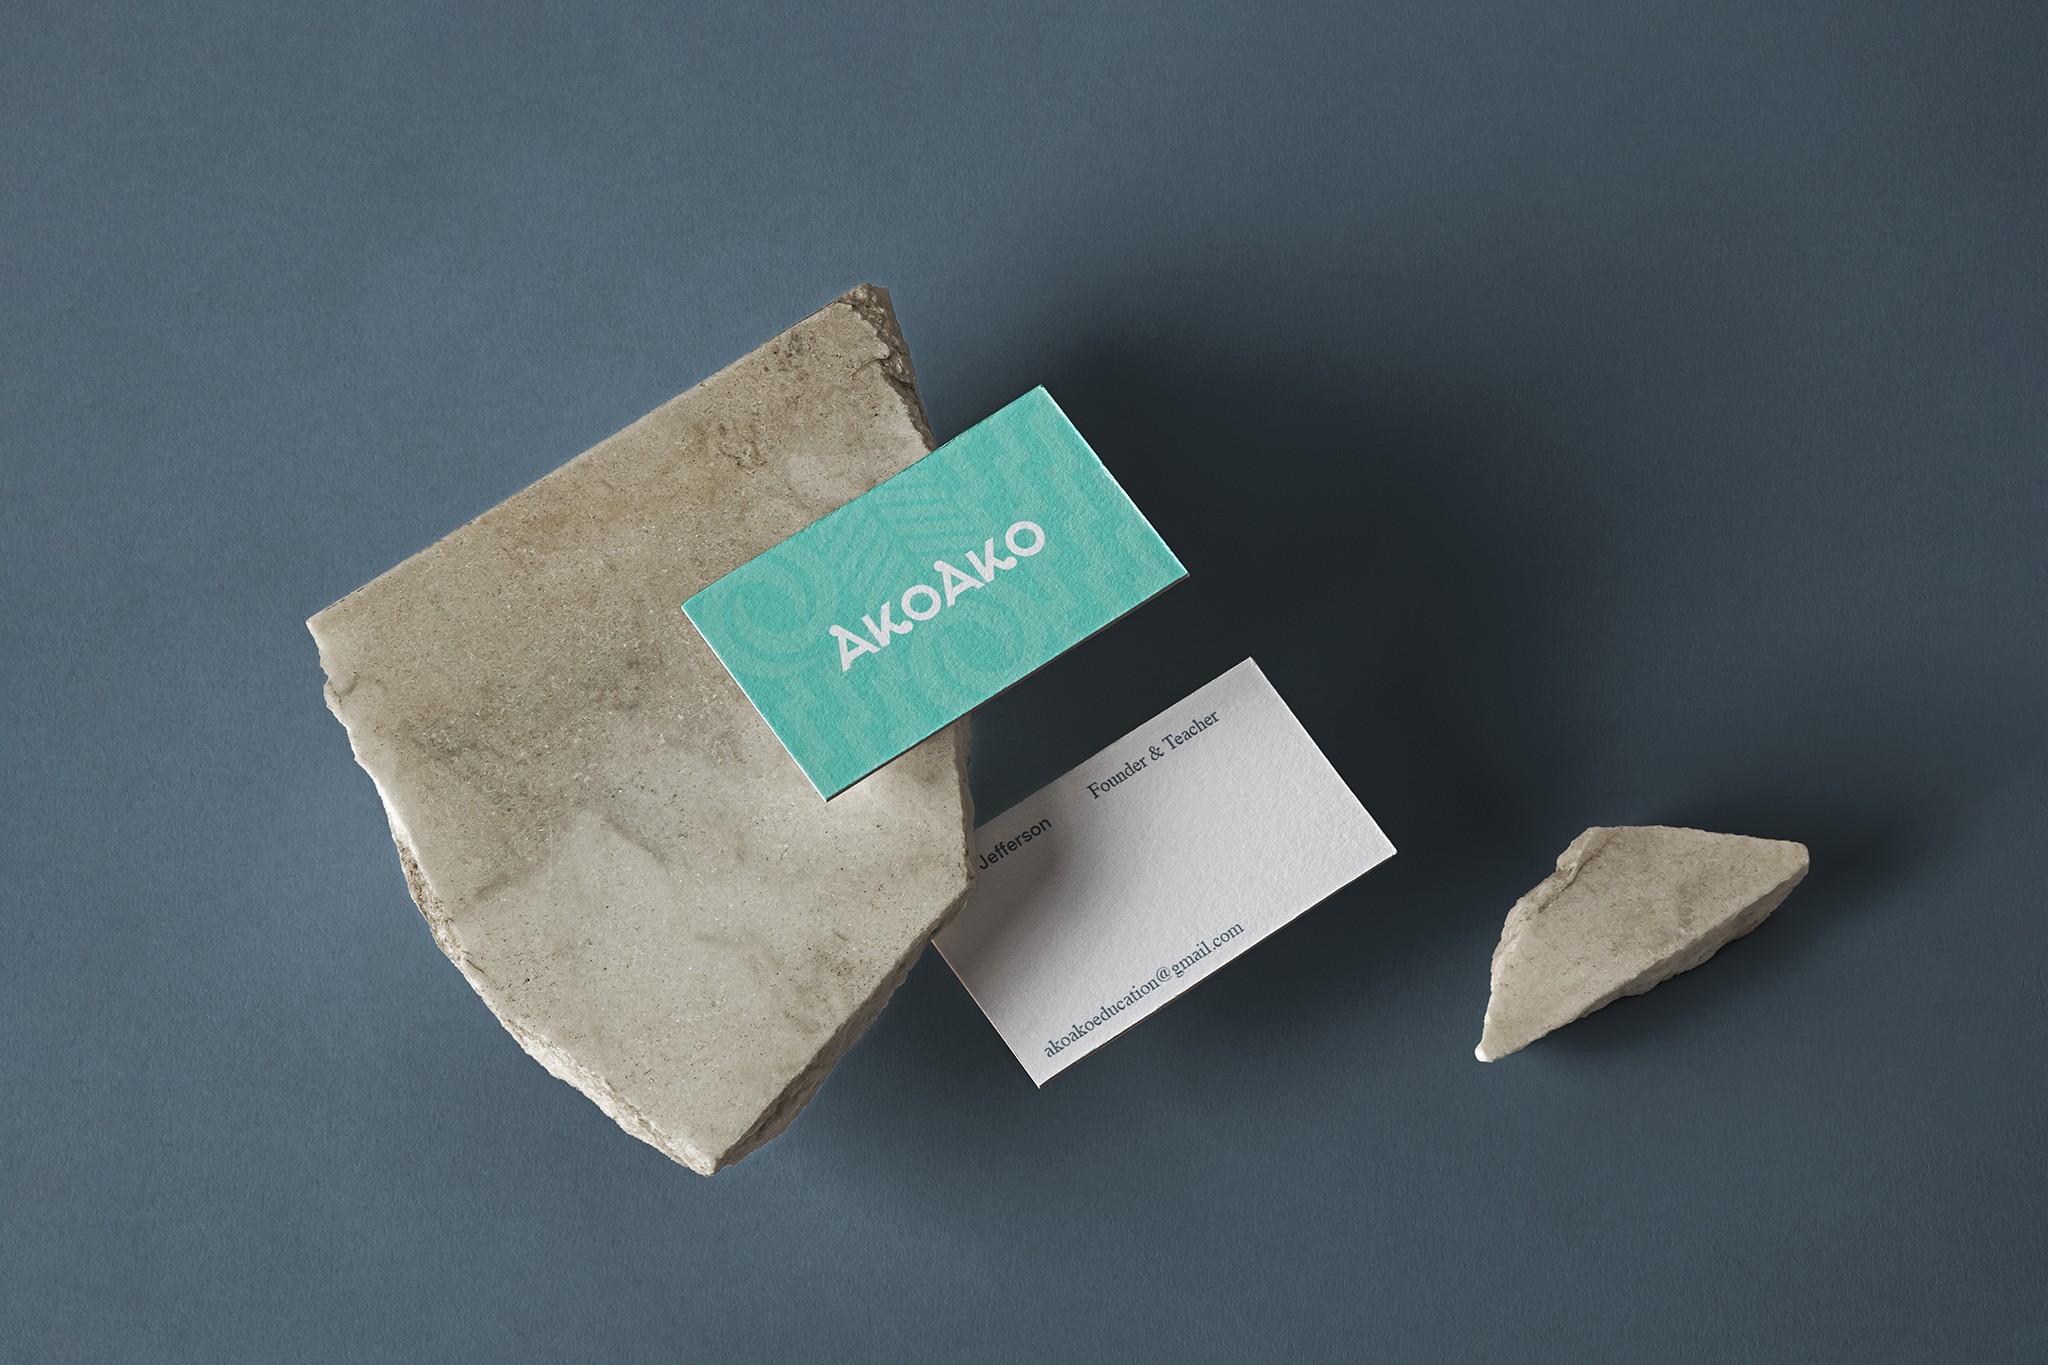 The picture shows two business cards with a Maori pattern for Akoako lying on a rock